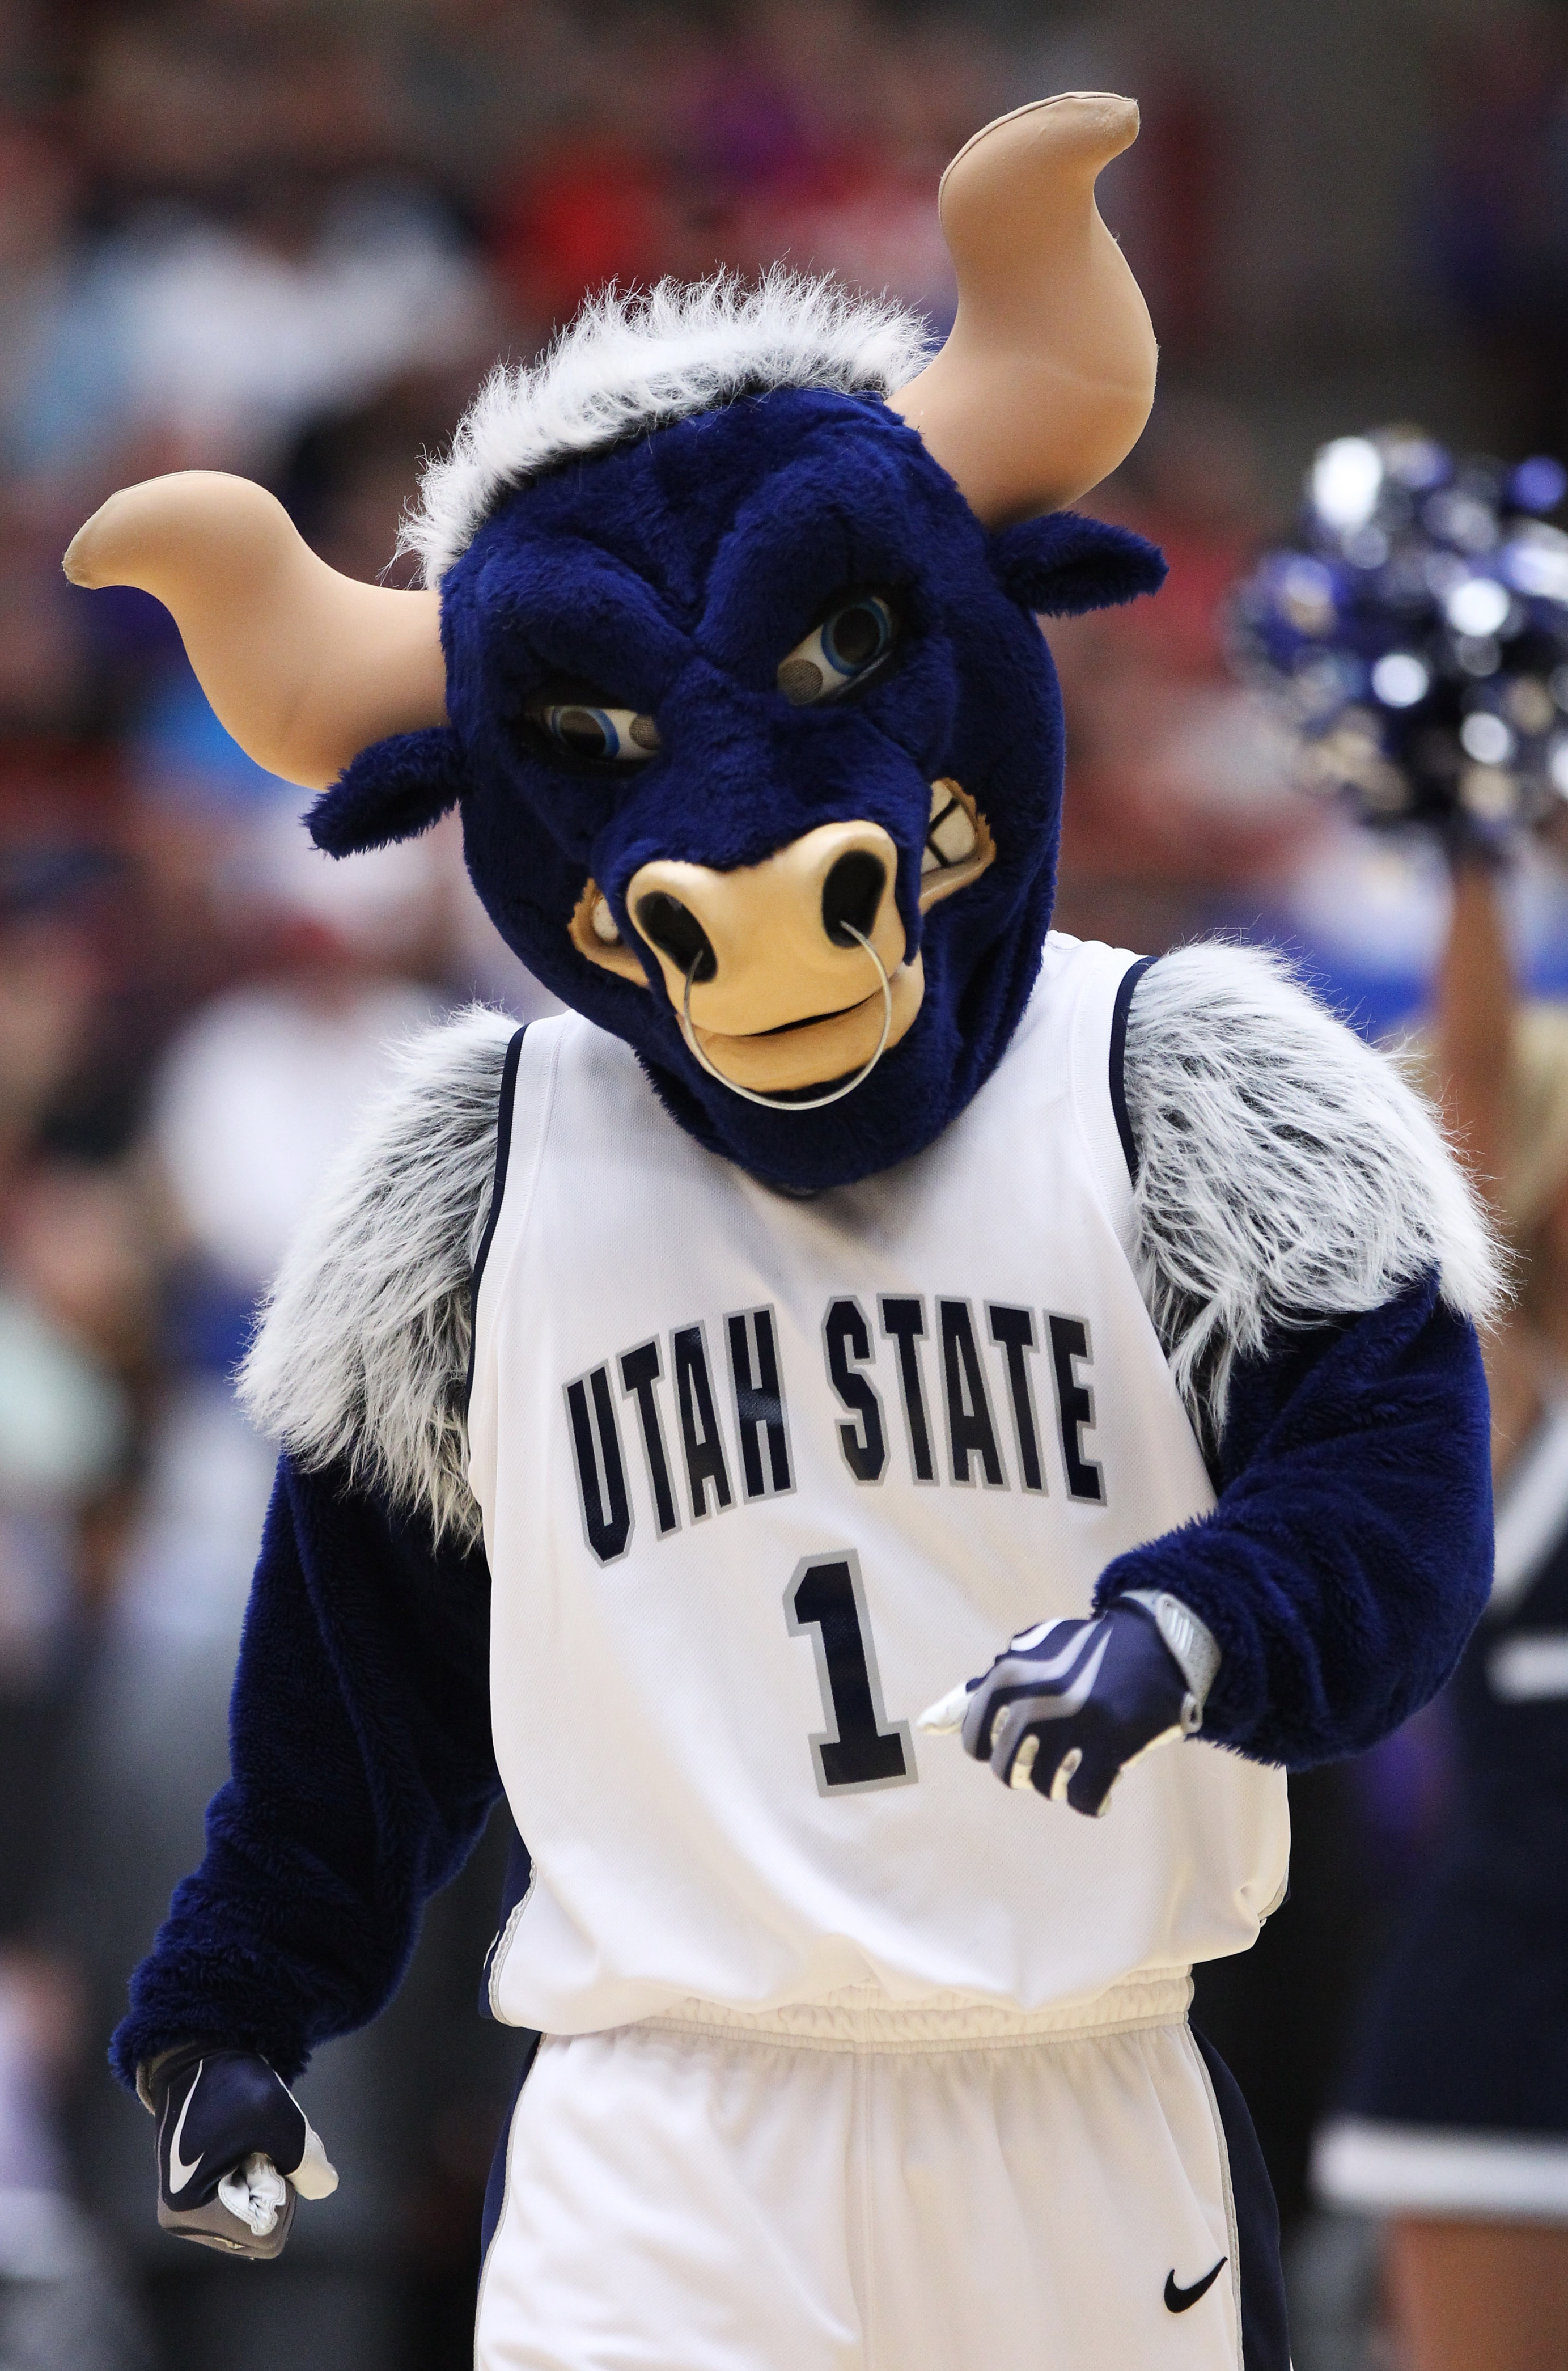 TUCSON, AZ - MARCH 17:  The Utah State Aggies mascot performs during their game against the Kansas State Wildcats the second round of the 2011 NCAA men's basketball tournament at McKale Center on March 17, 2011 in Tucson, Arizona.  (Photo by Christian Pet